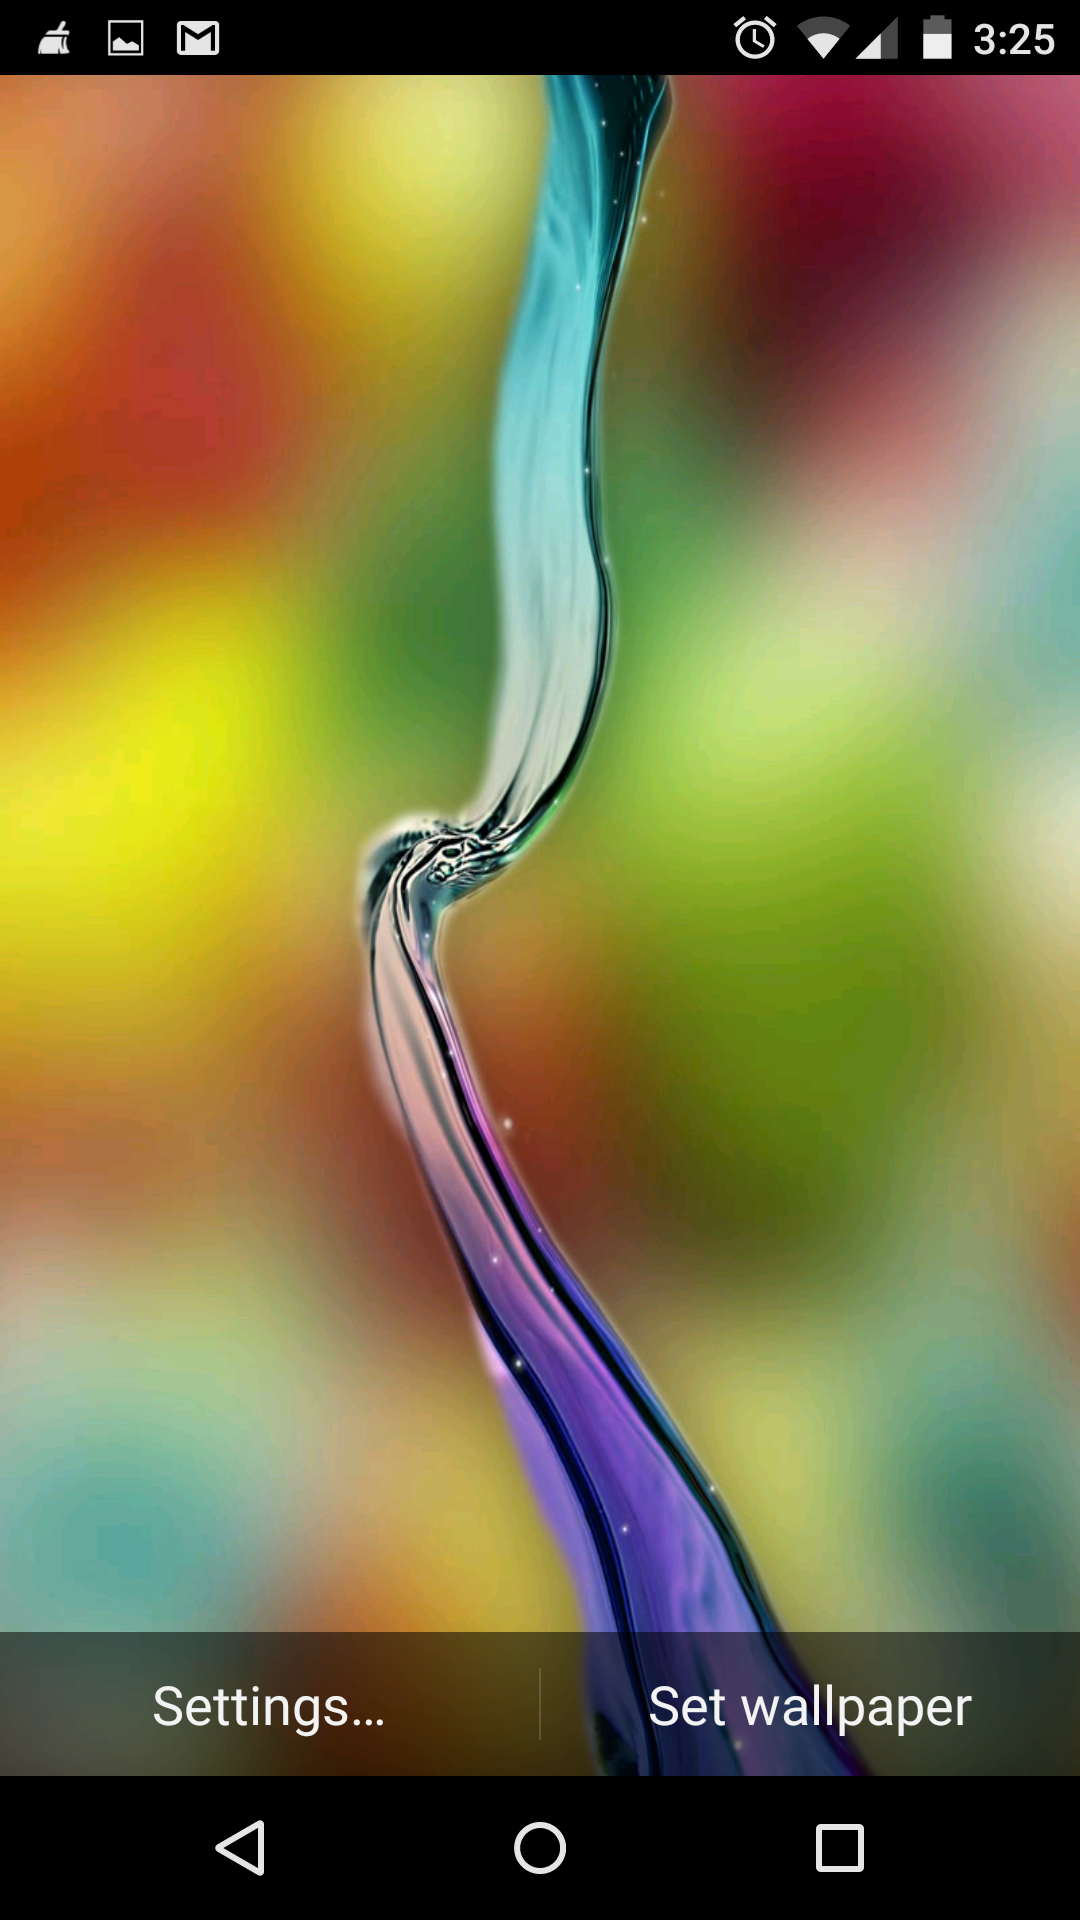 The Samsung Galaxy S6 Released With Several Live Wallpaper